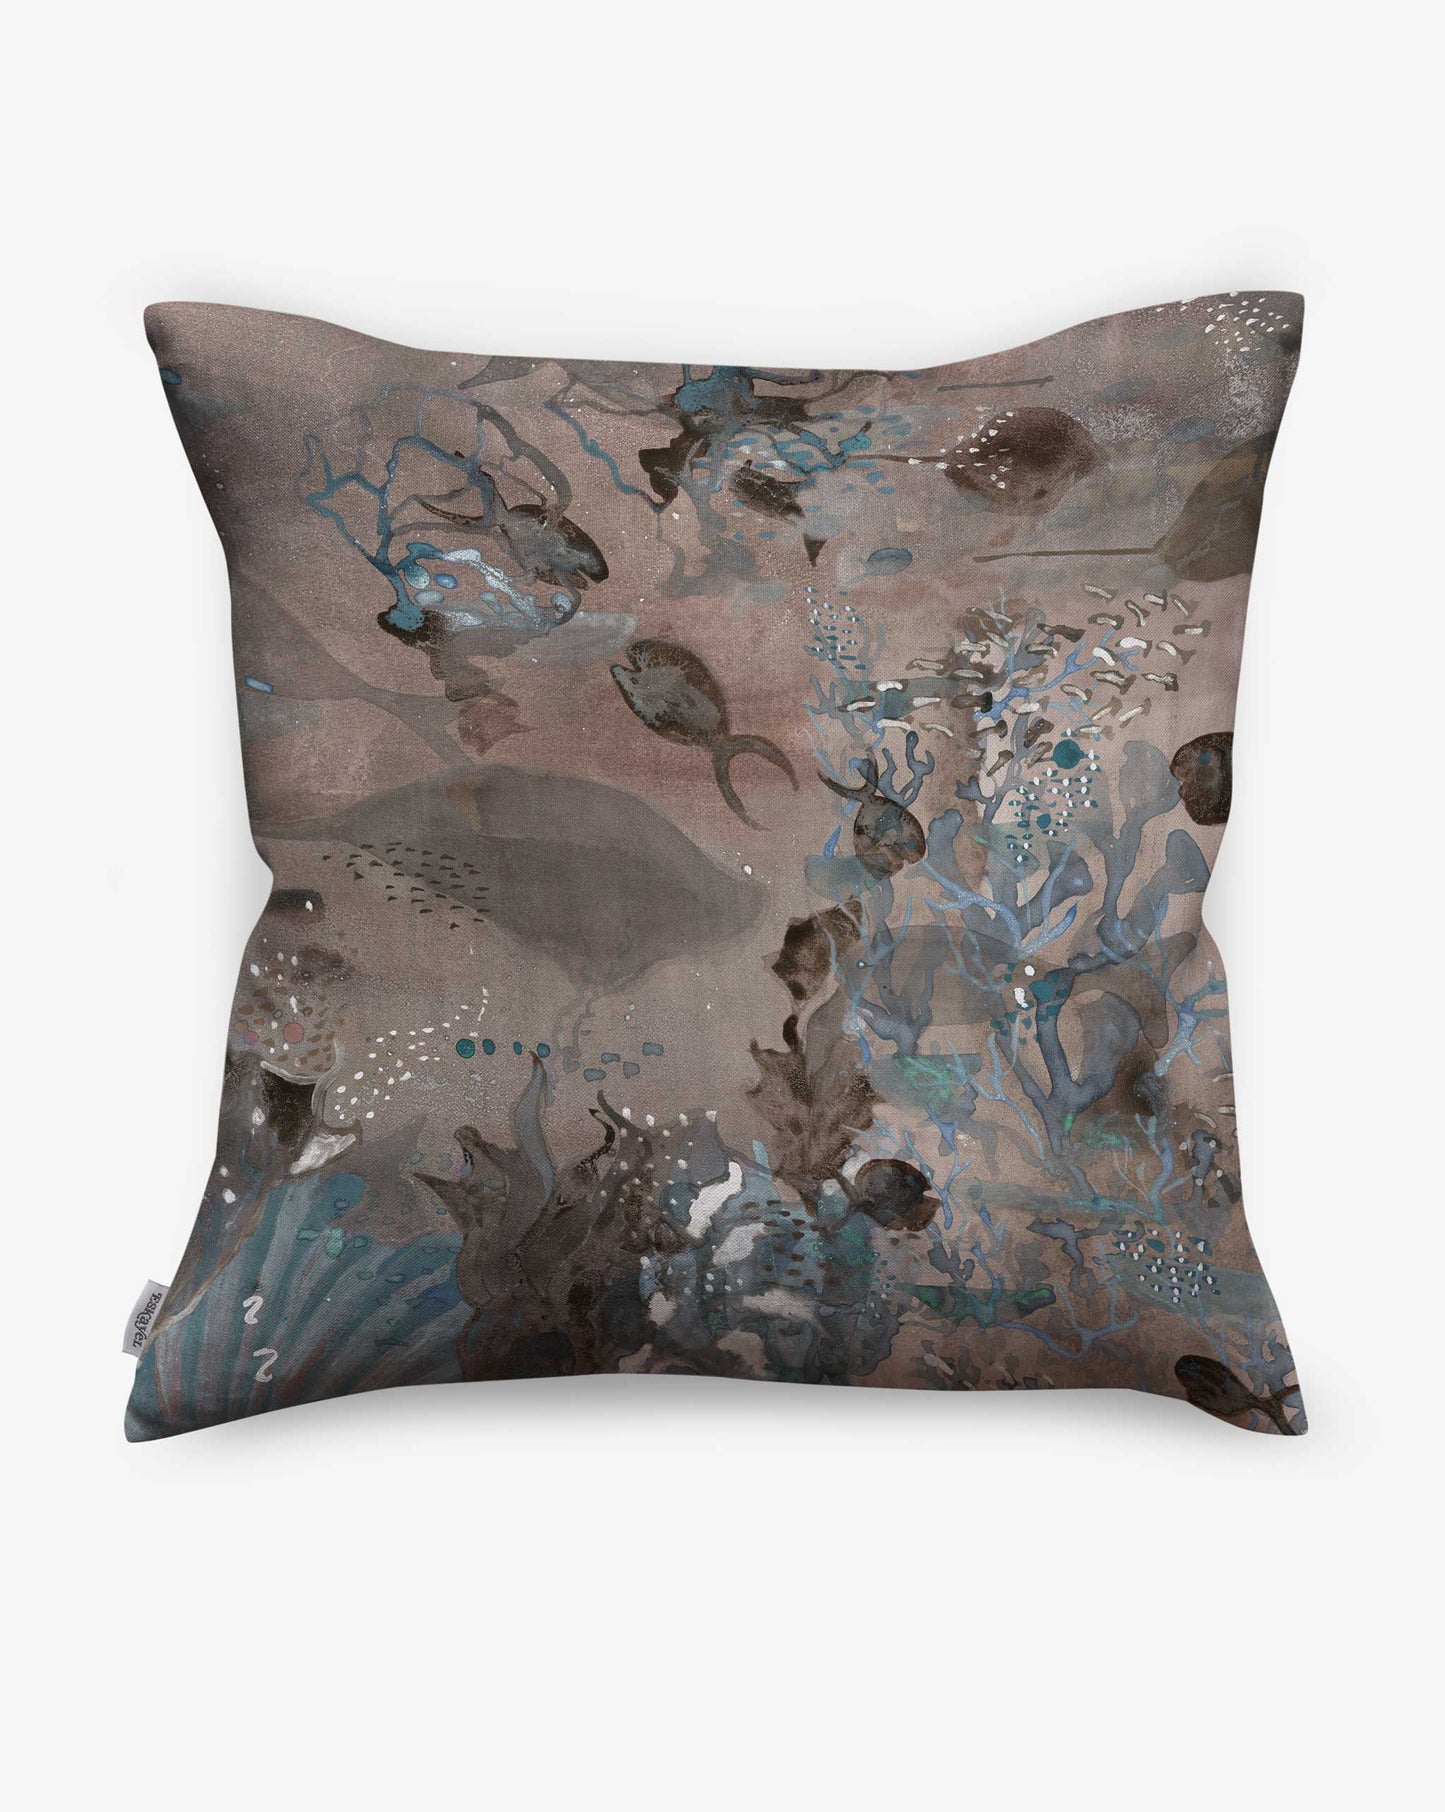 In the Amber colorway, the oceanic Atoll pillow design from Eskayel features brown hues.